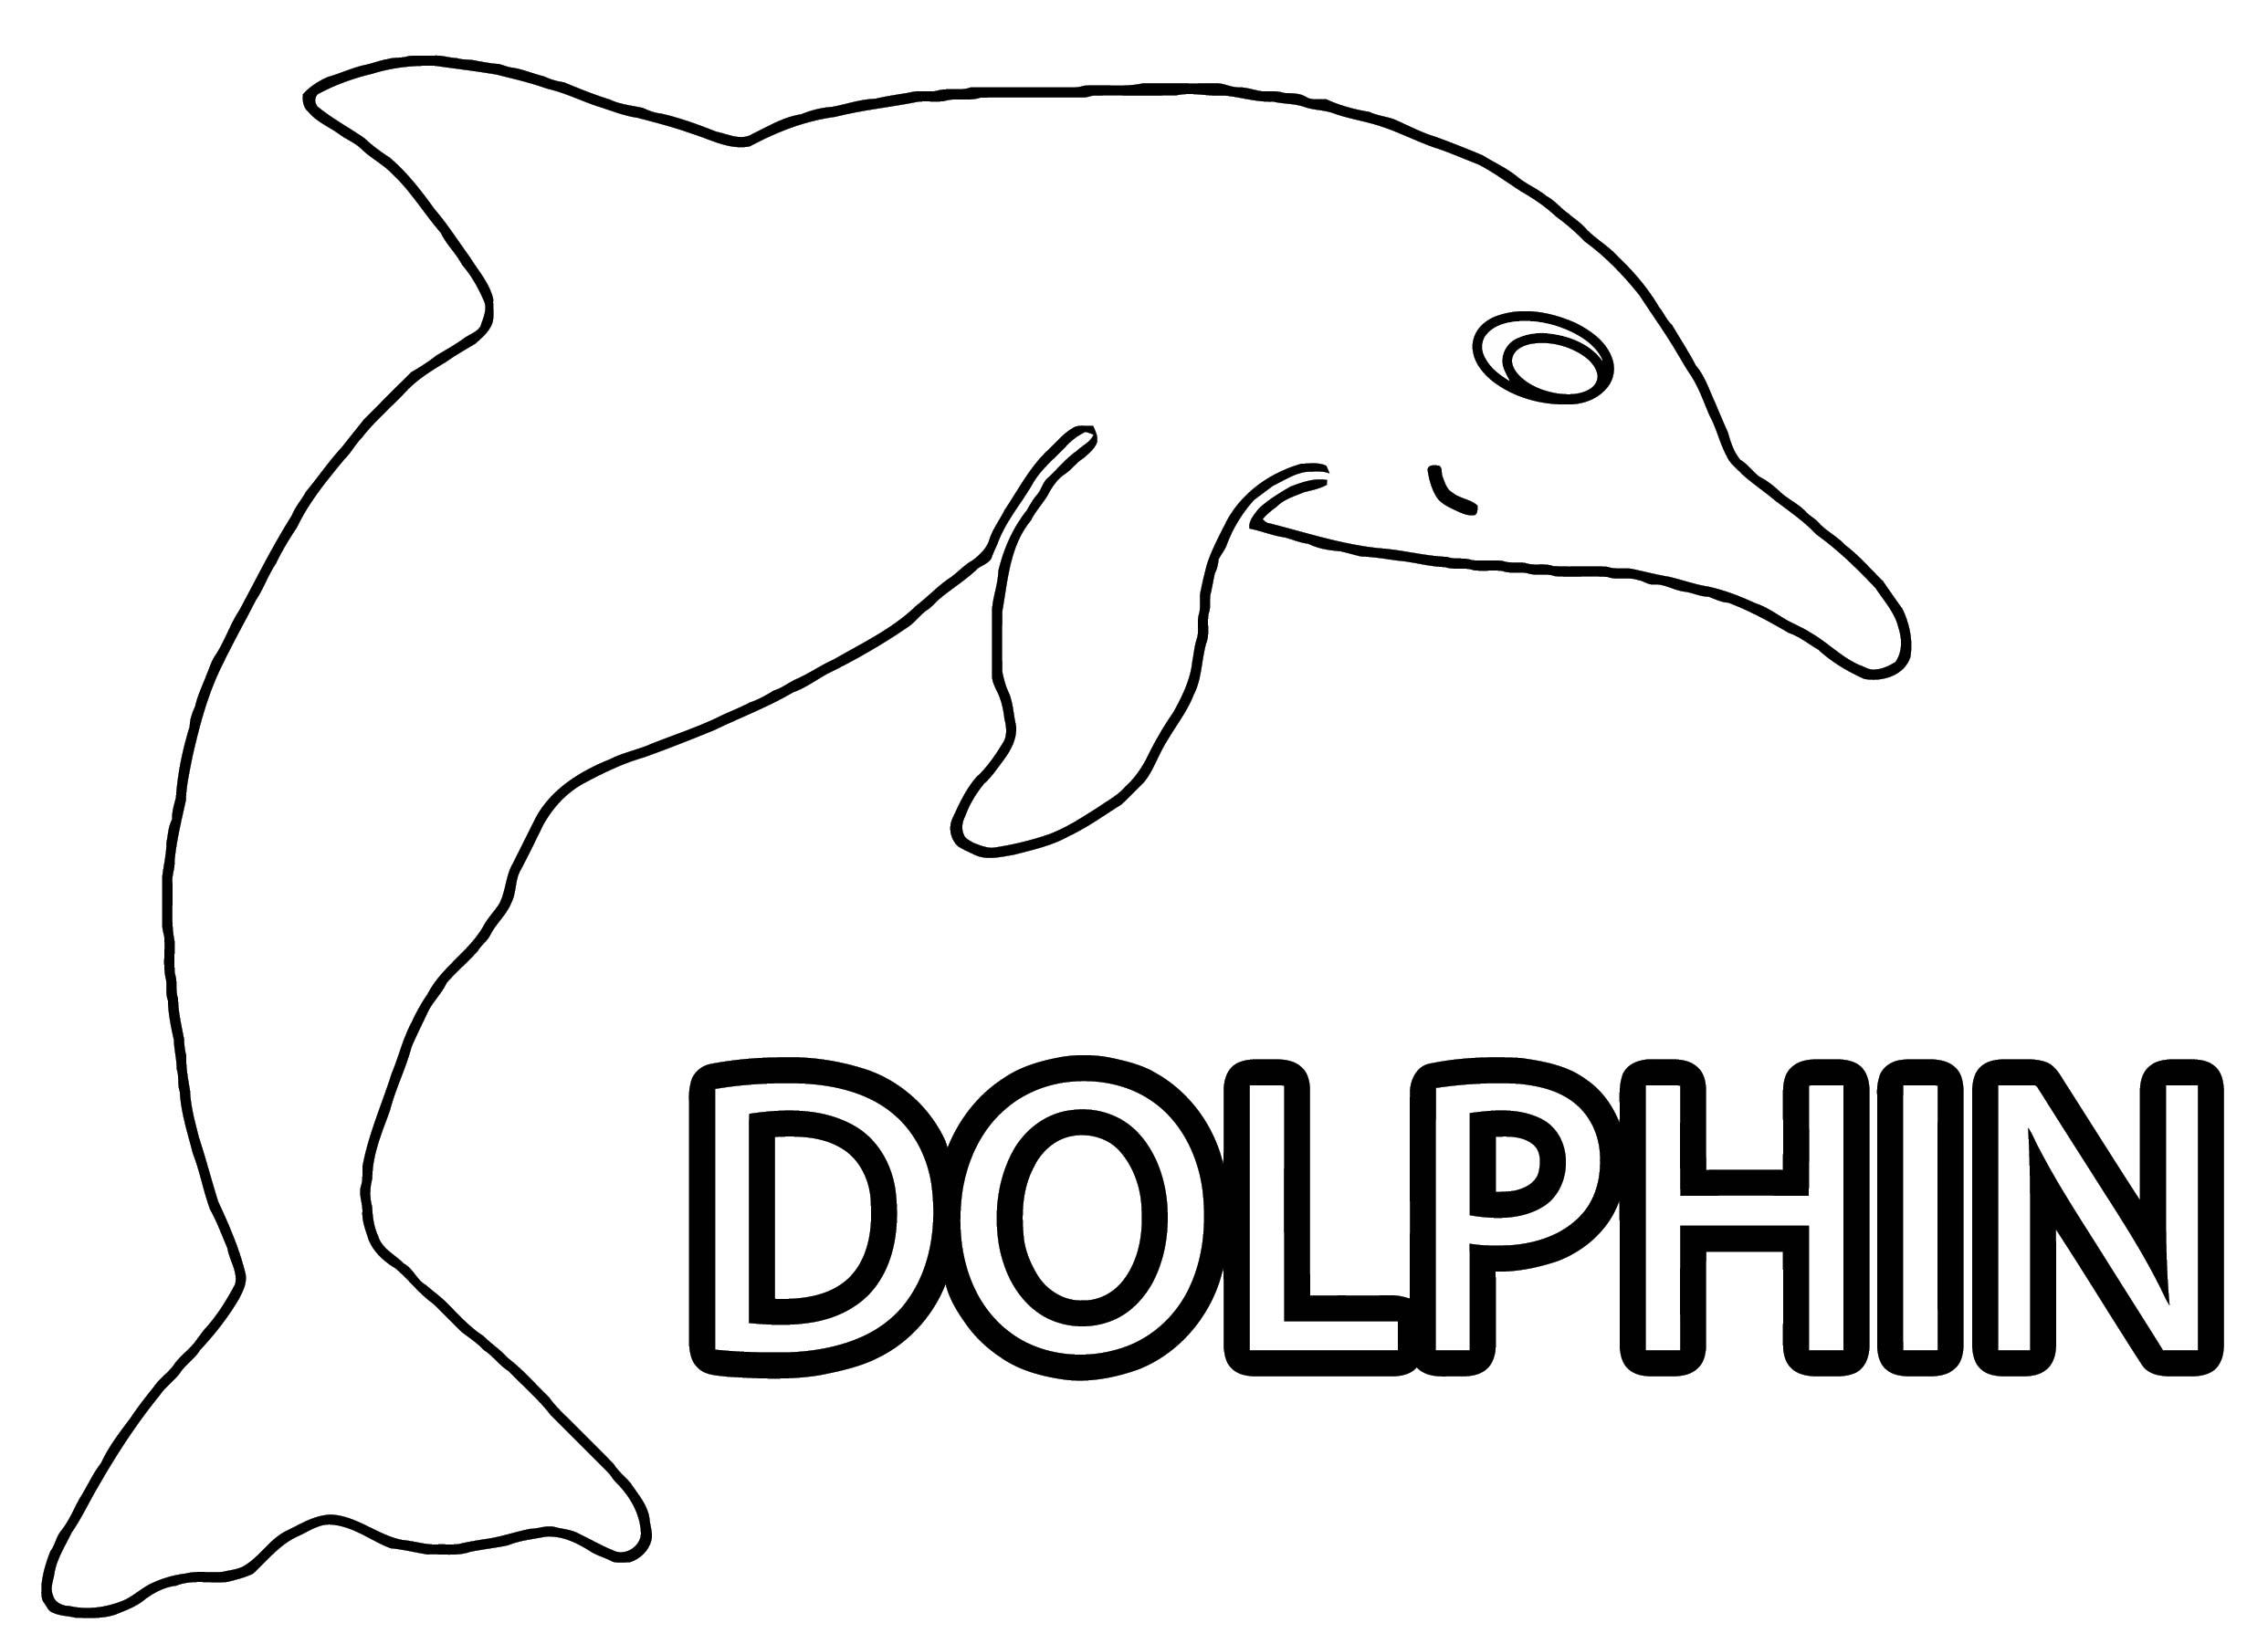 Dolphin Coloring Page 034 - Wecoloringpage.com